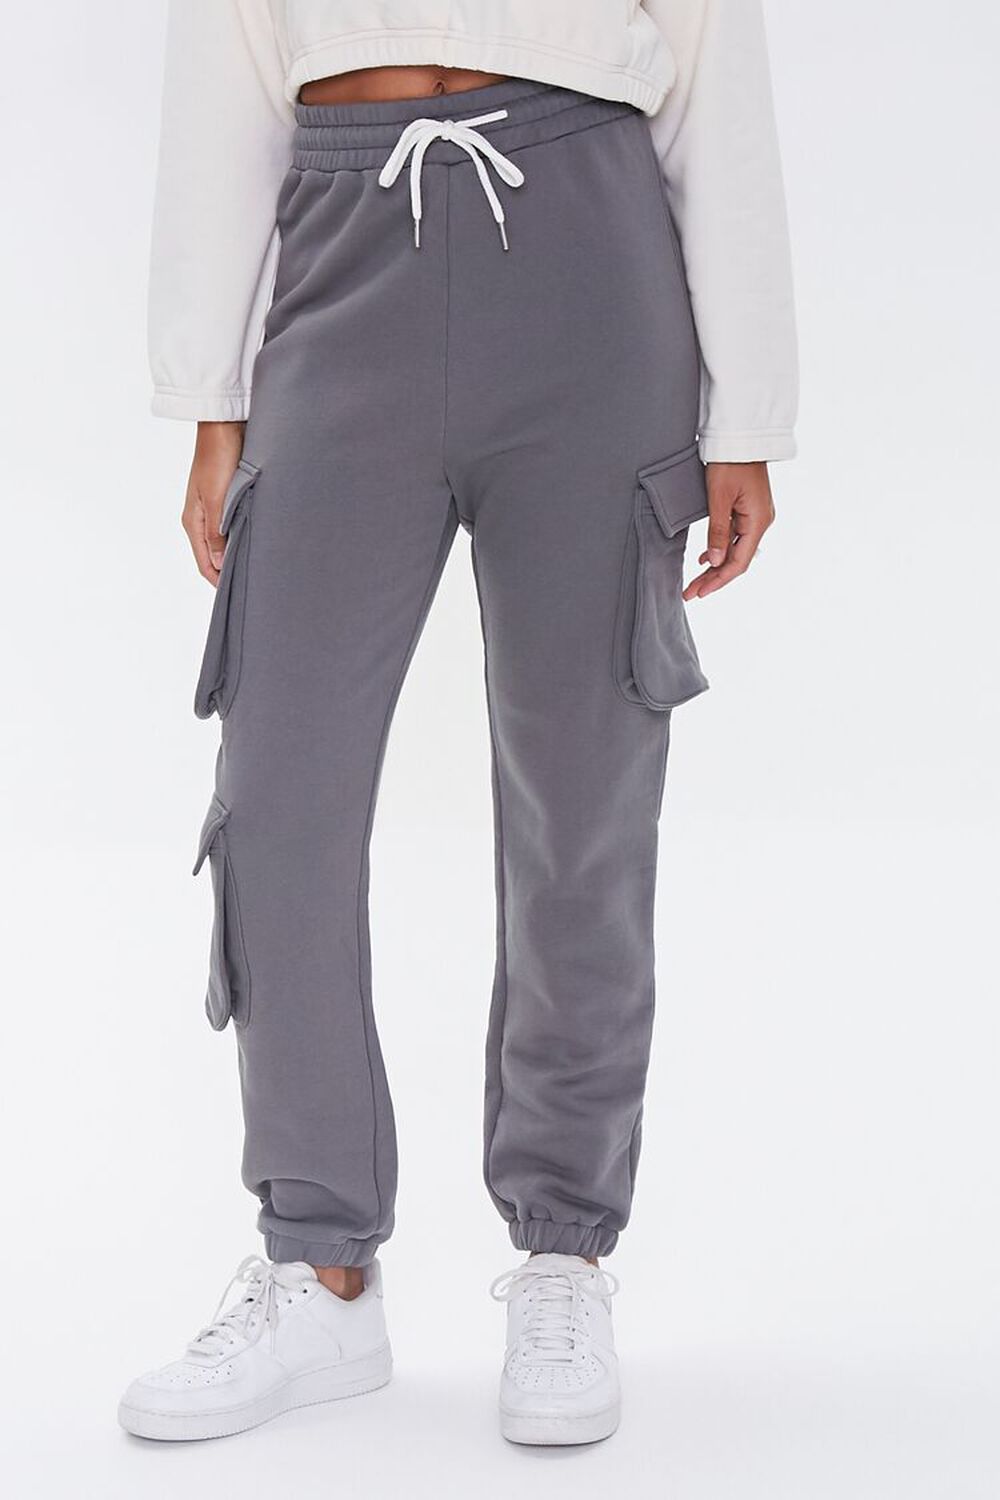 CHARCOAL French Terry Cargo Joggers, image 2